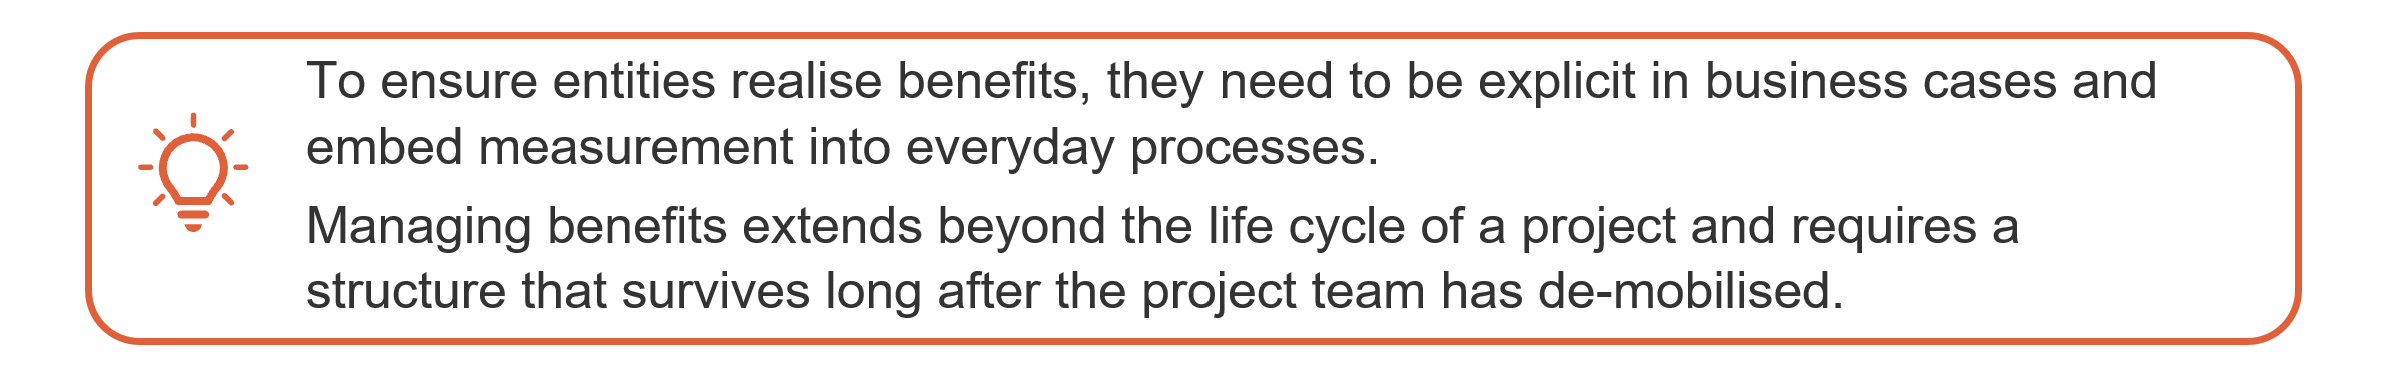 Managing benefits extends beyond the life cycle of a project.